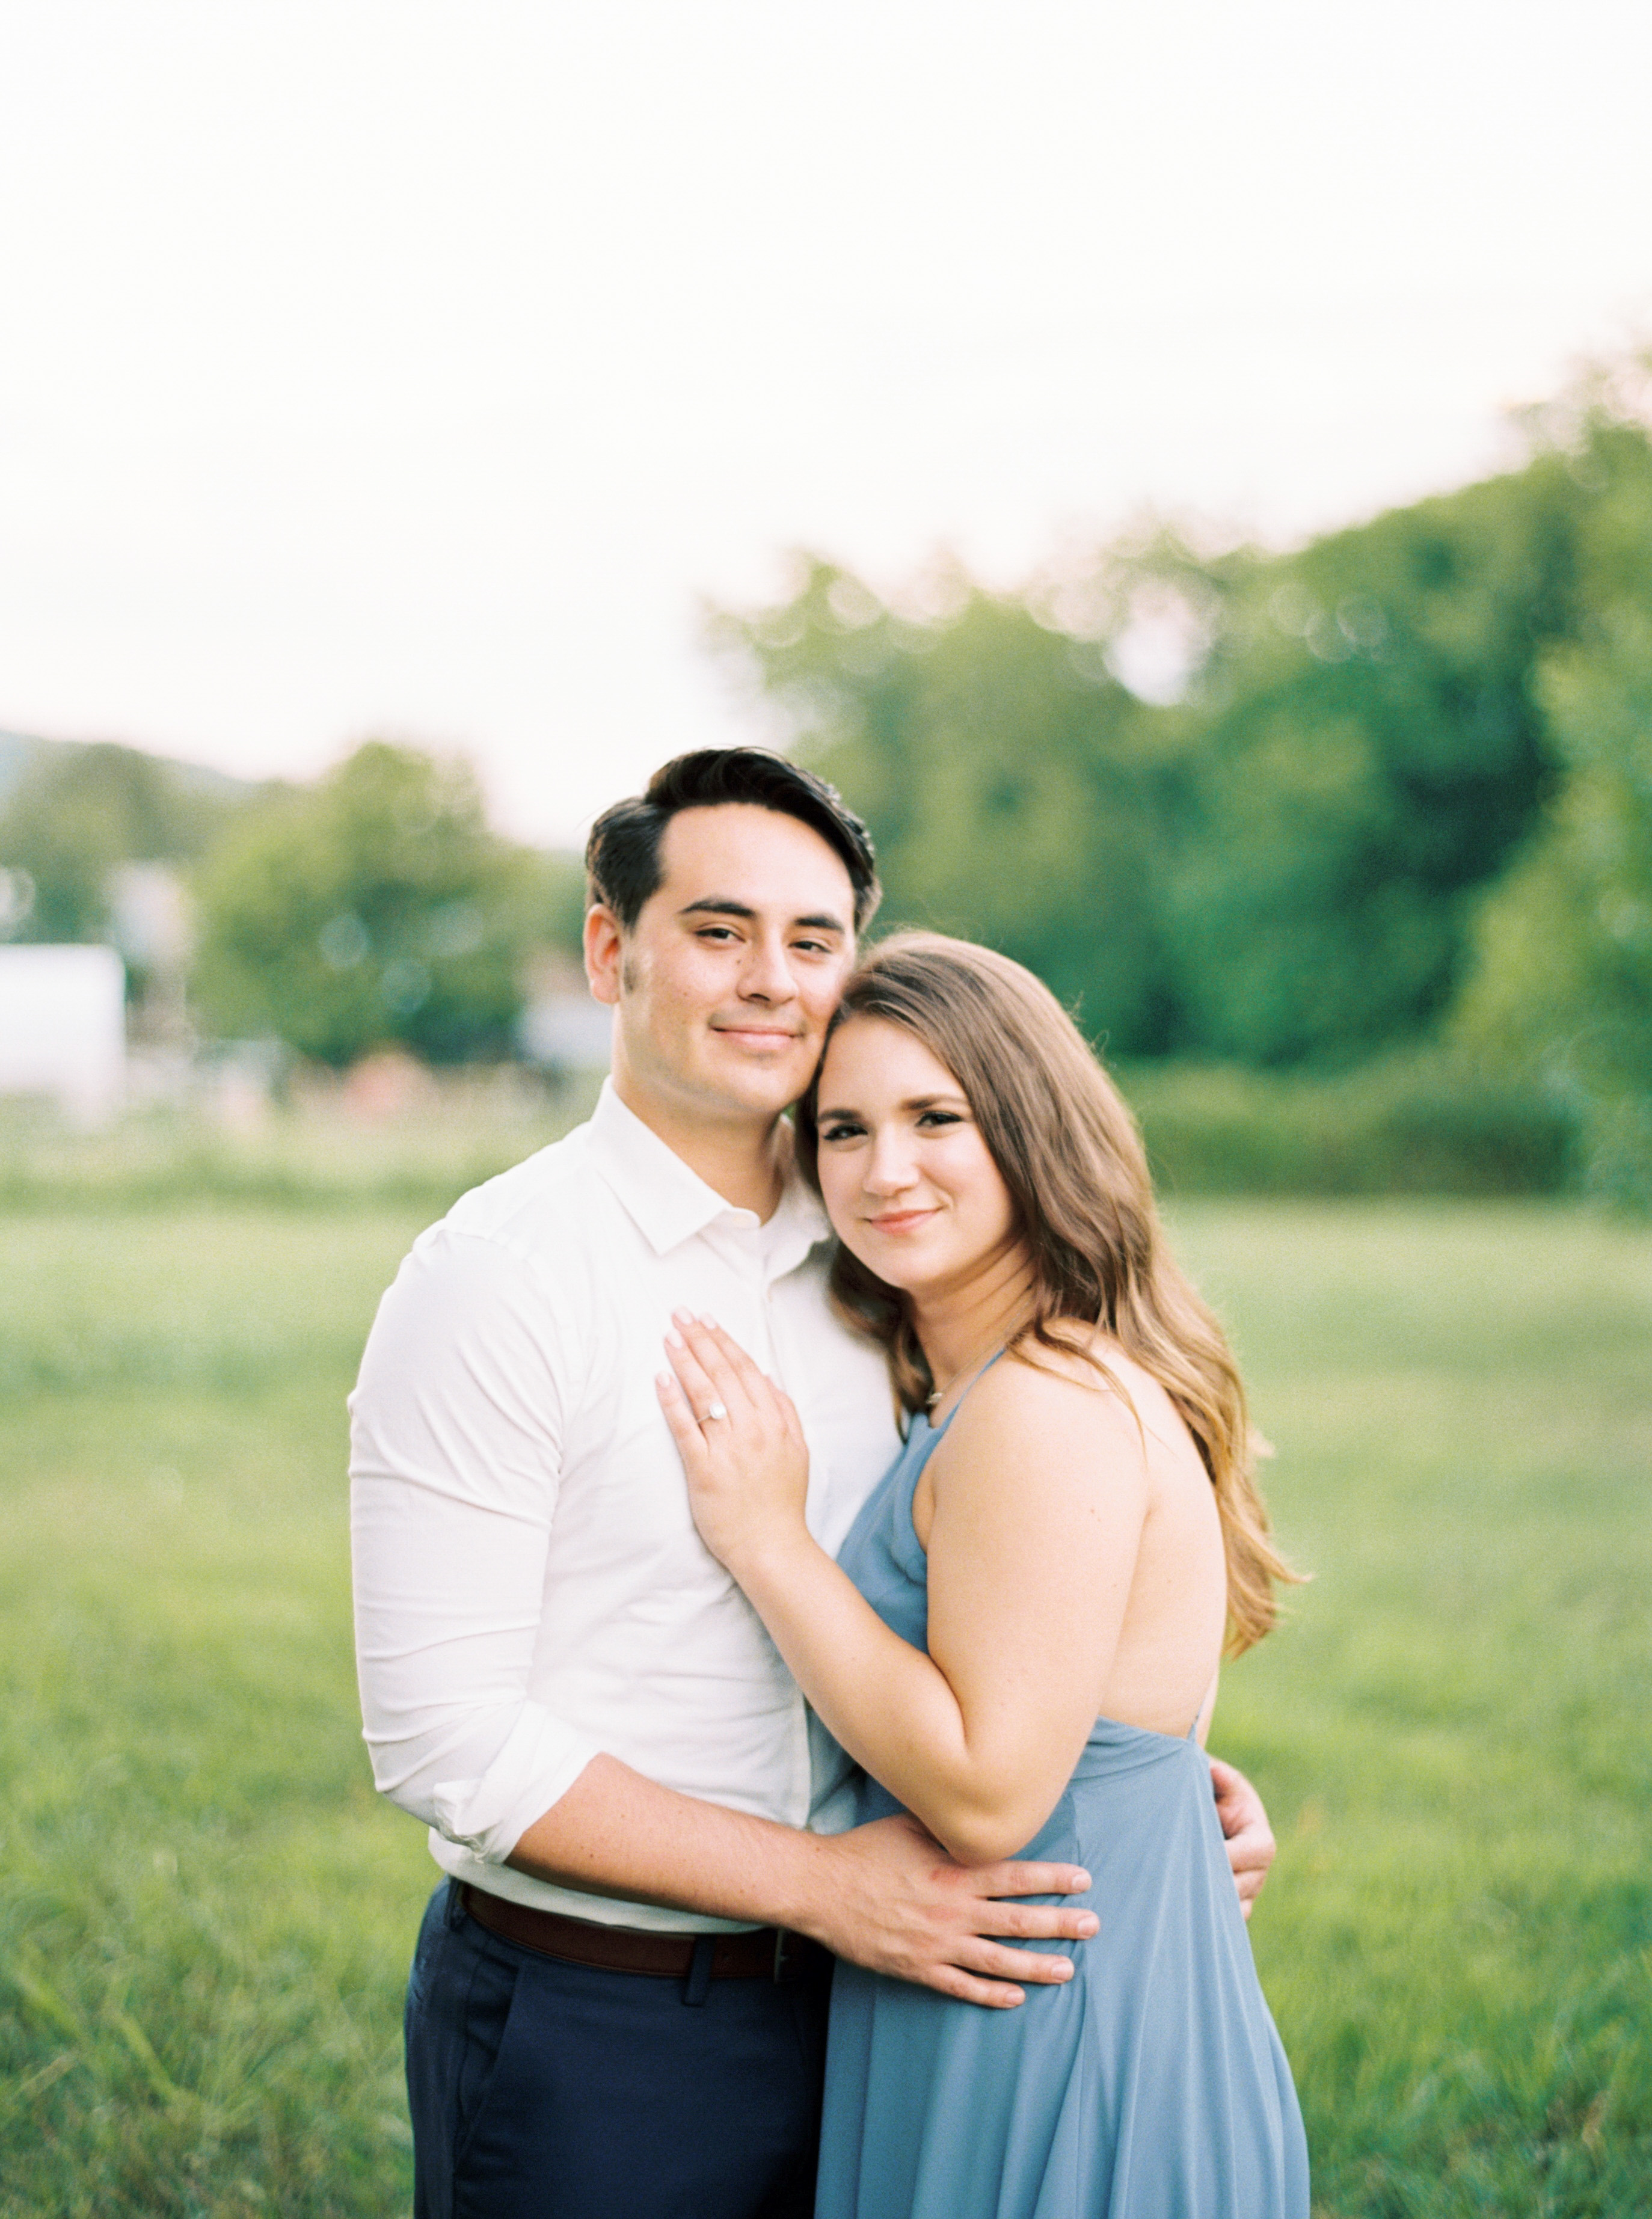 colorful photo of couple smiling